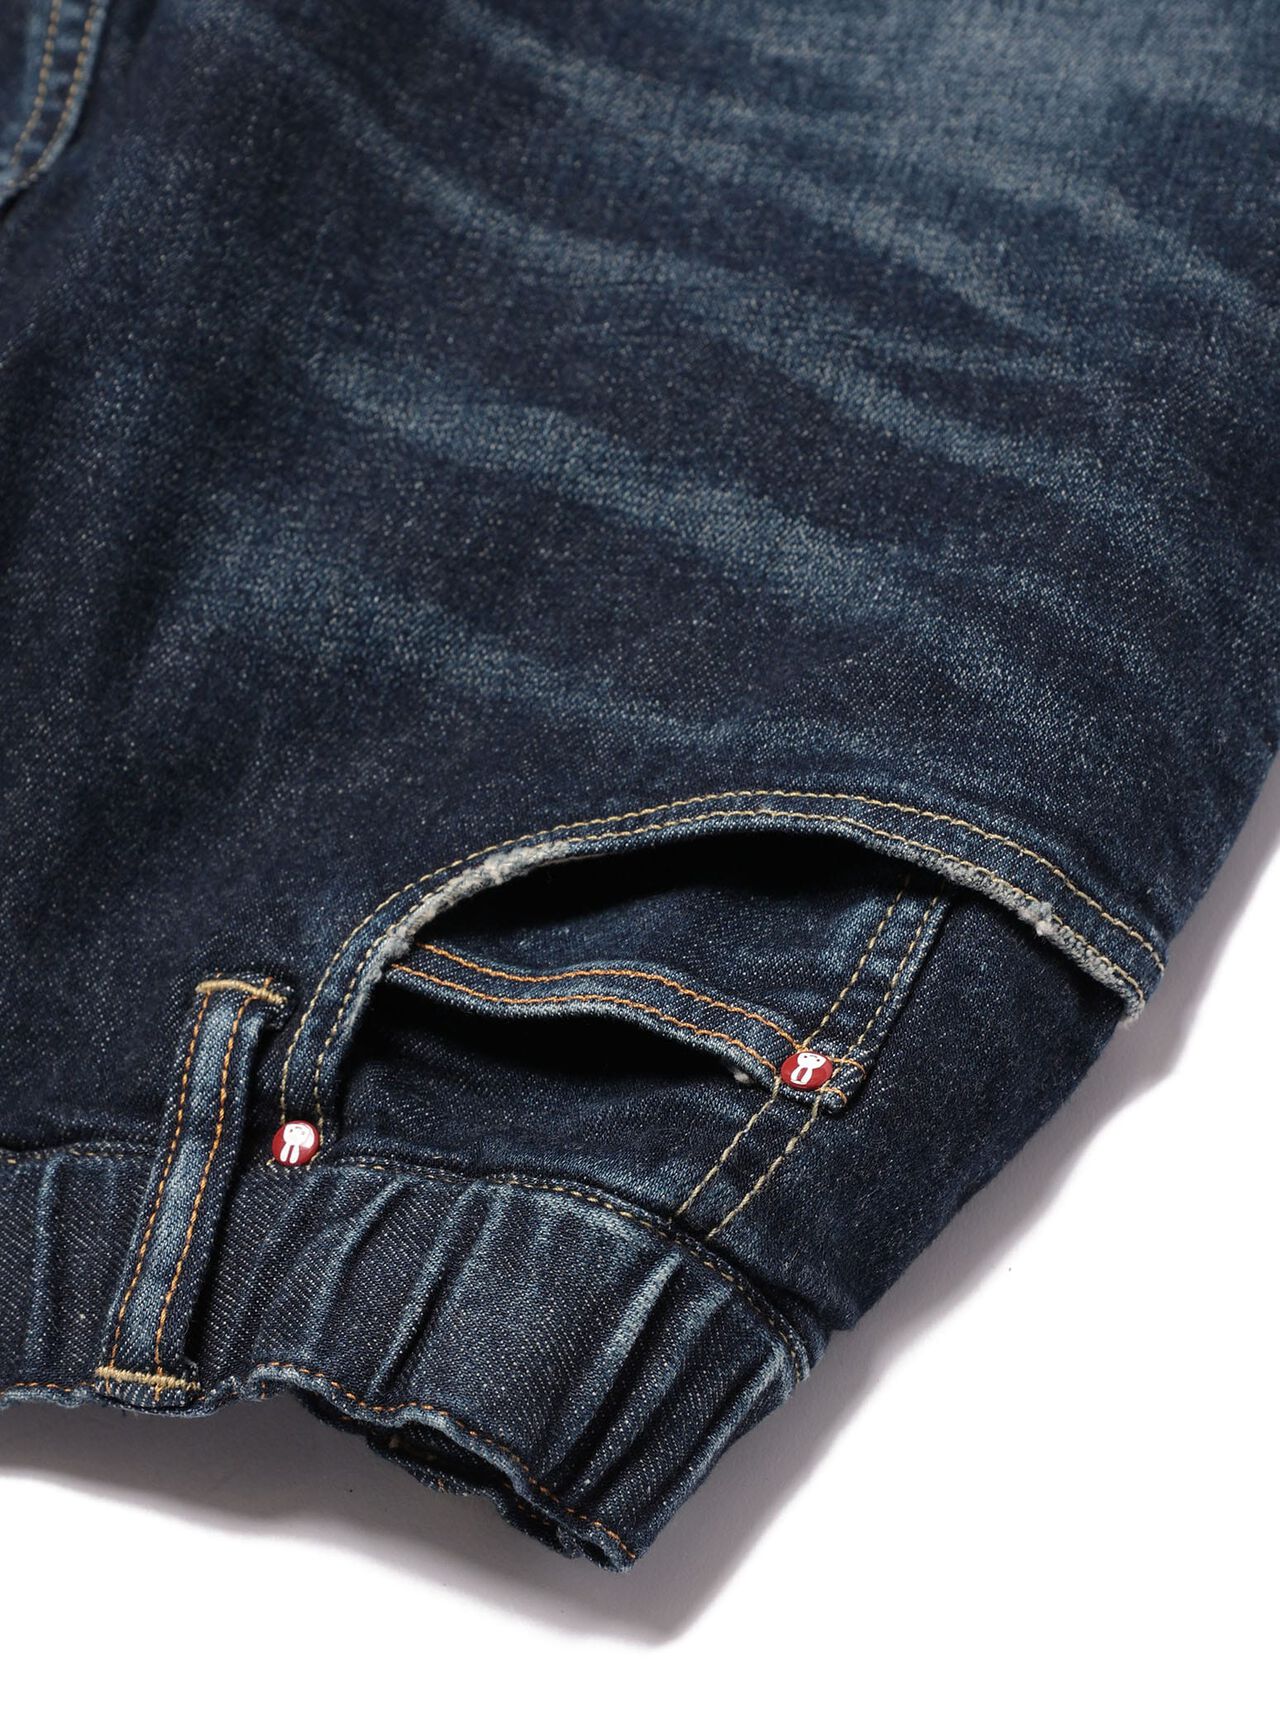 Jeans - Crotch 22-U2 3 years,M, large image number 6